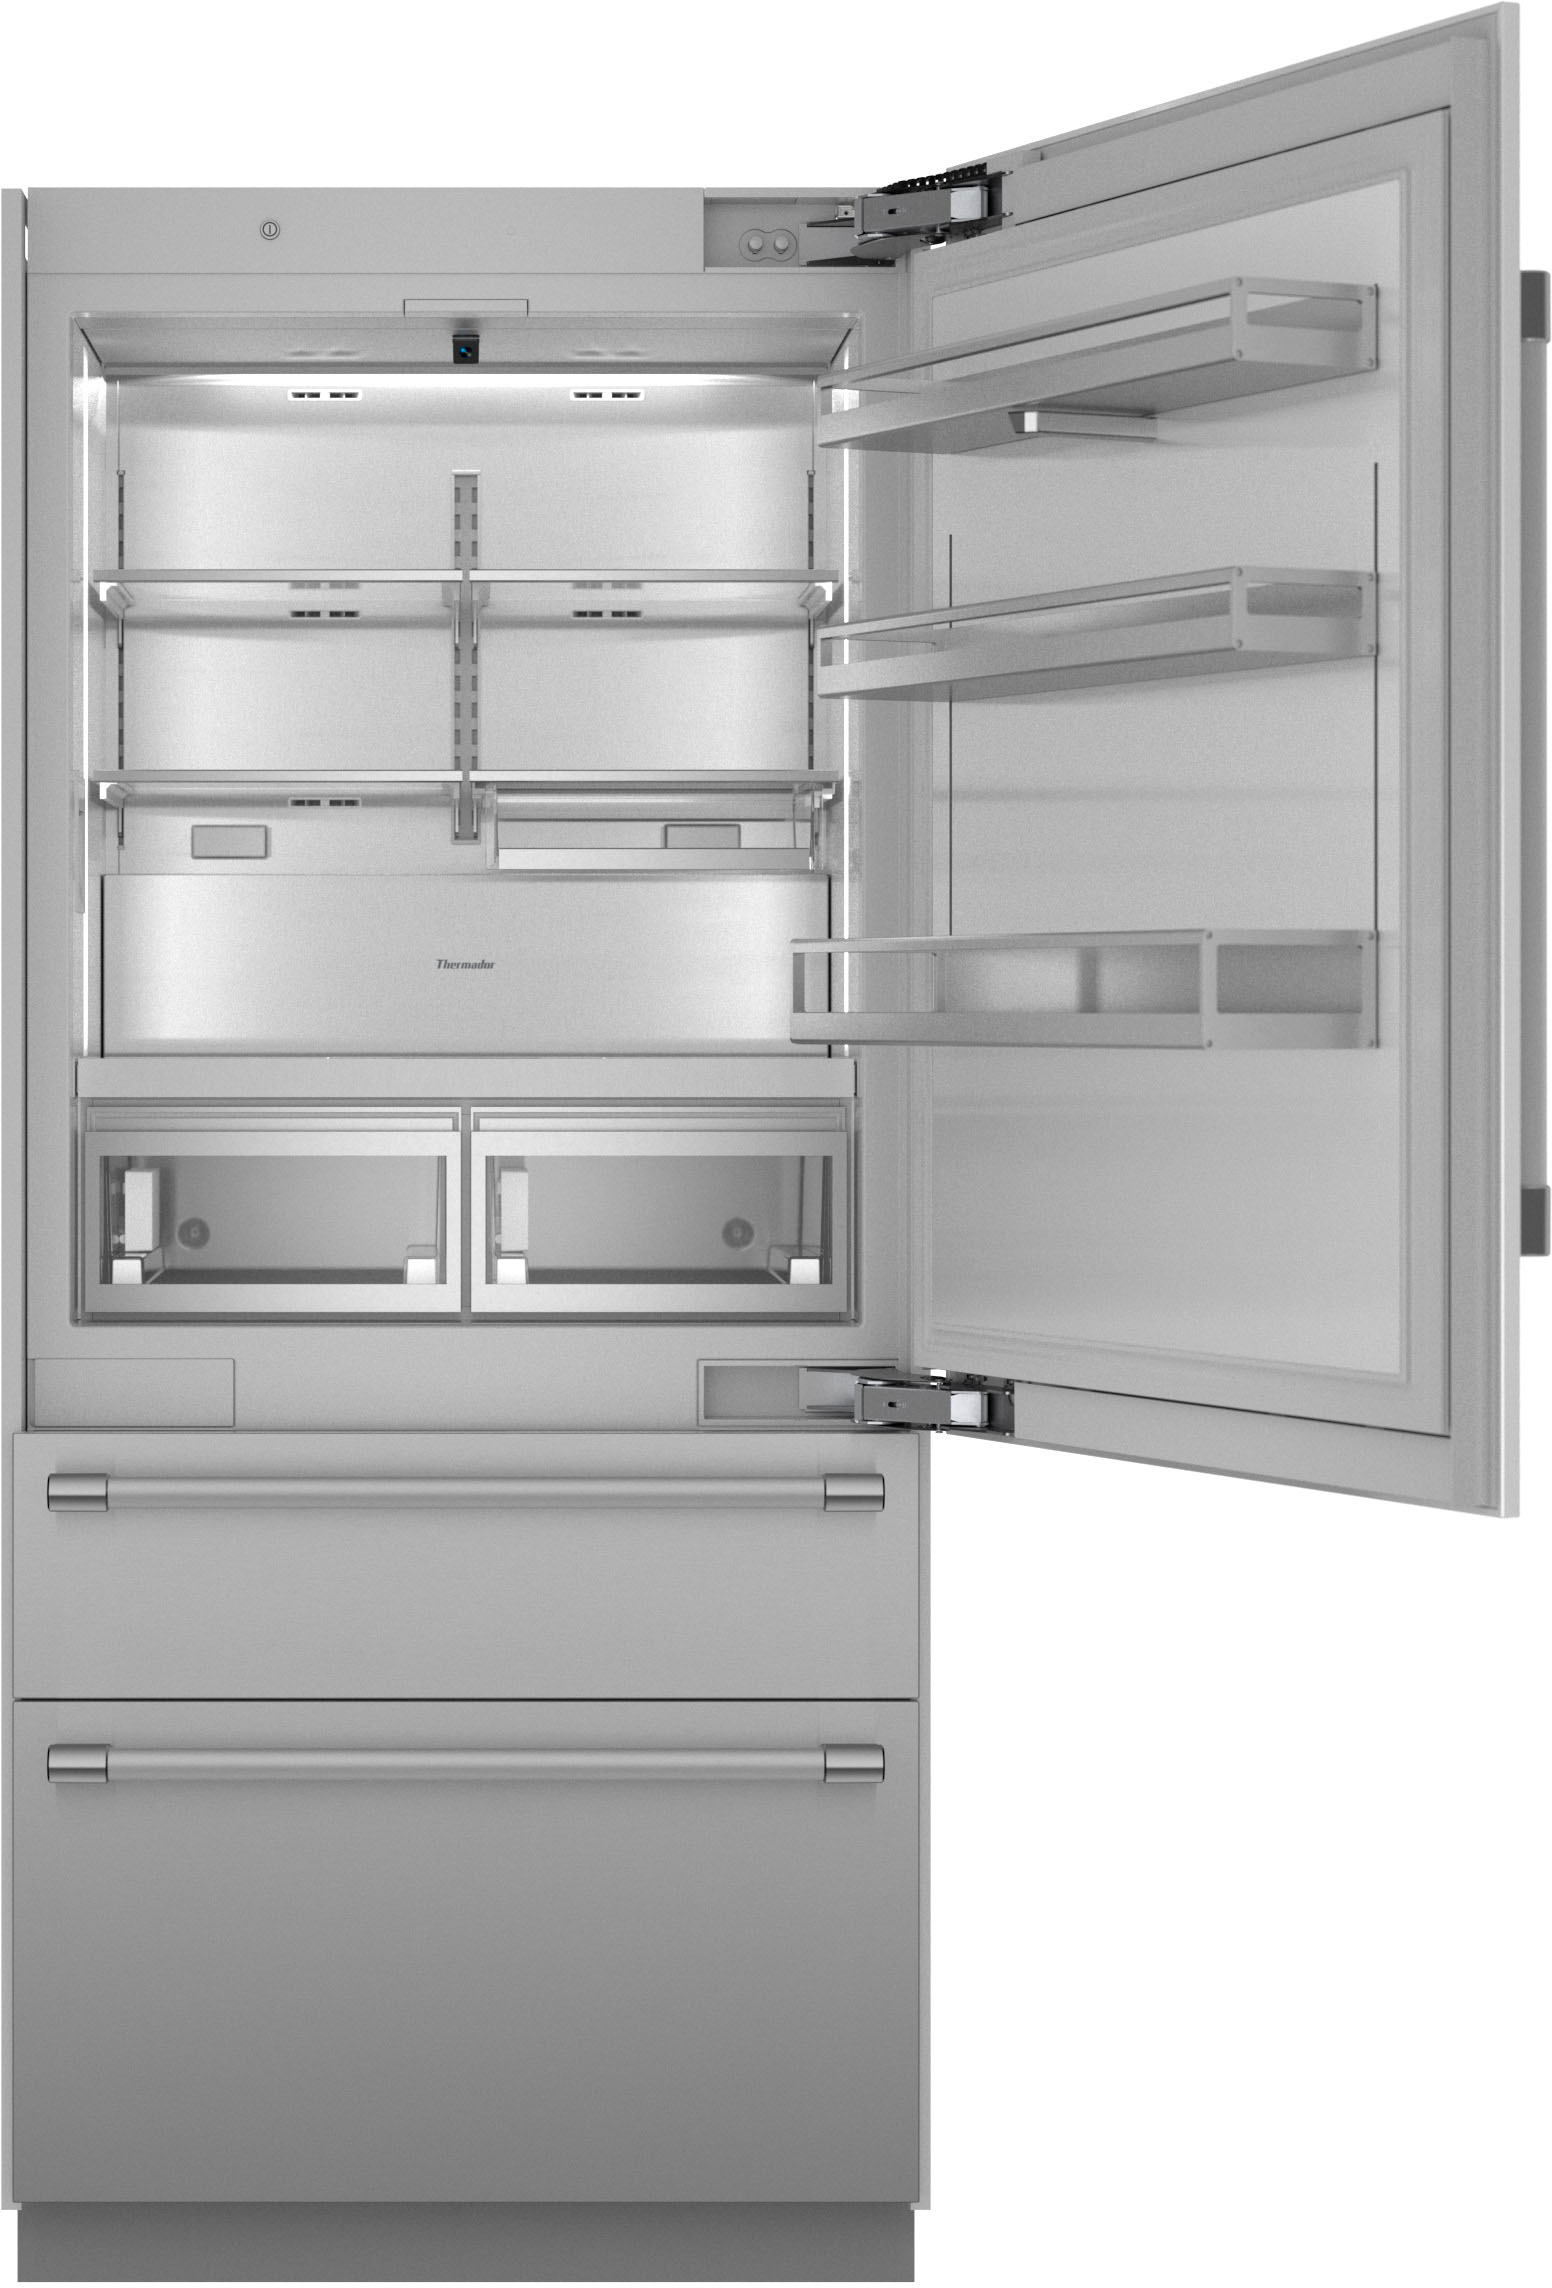 Thermador 36” Wide 20.6cu.ft Full Size Refrigerator for Sale in